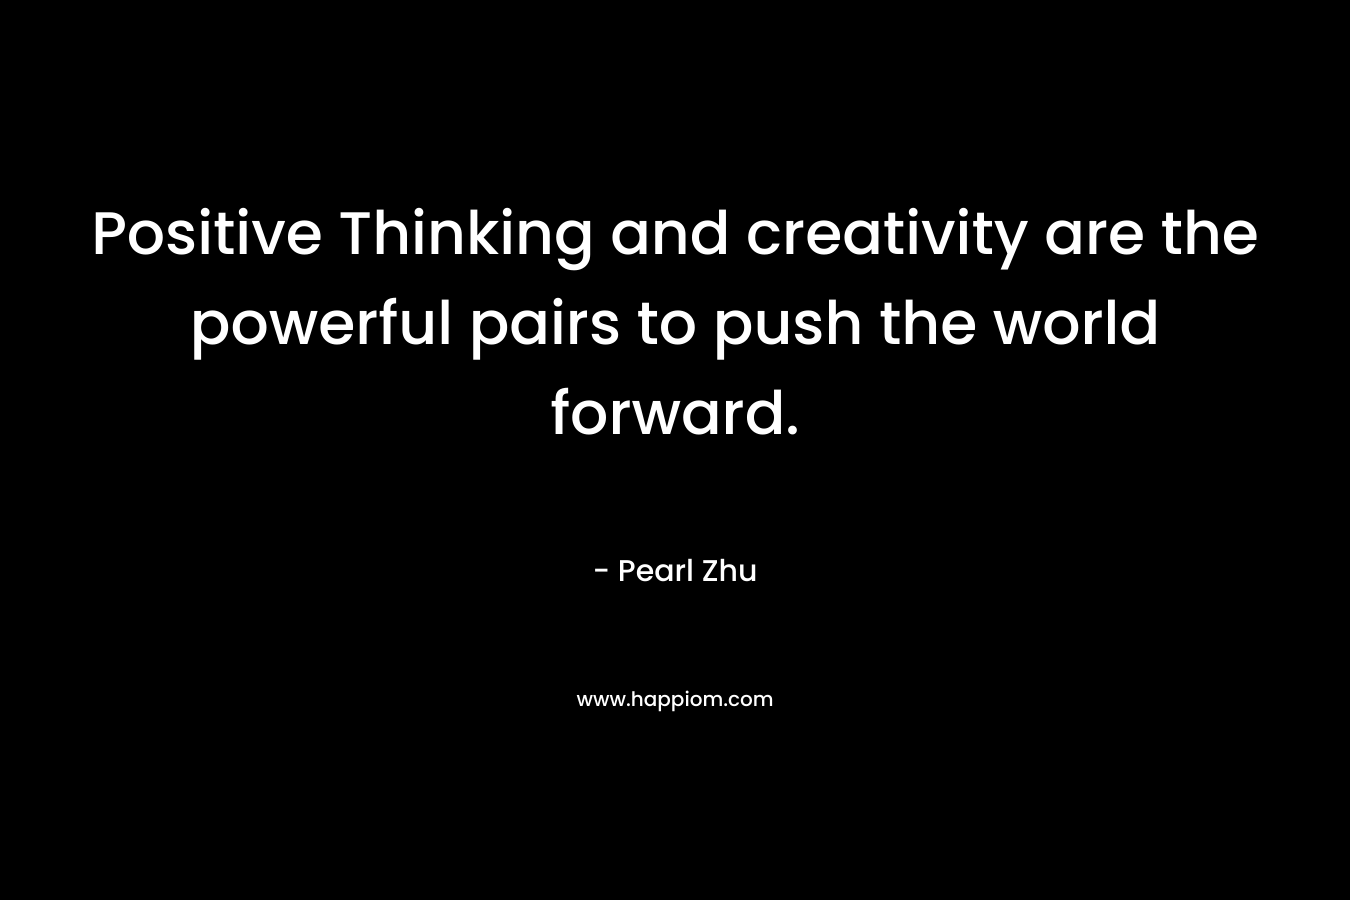 Positive Thinking and creativity are the powerful pairs to push the world forward.